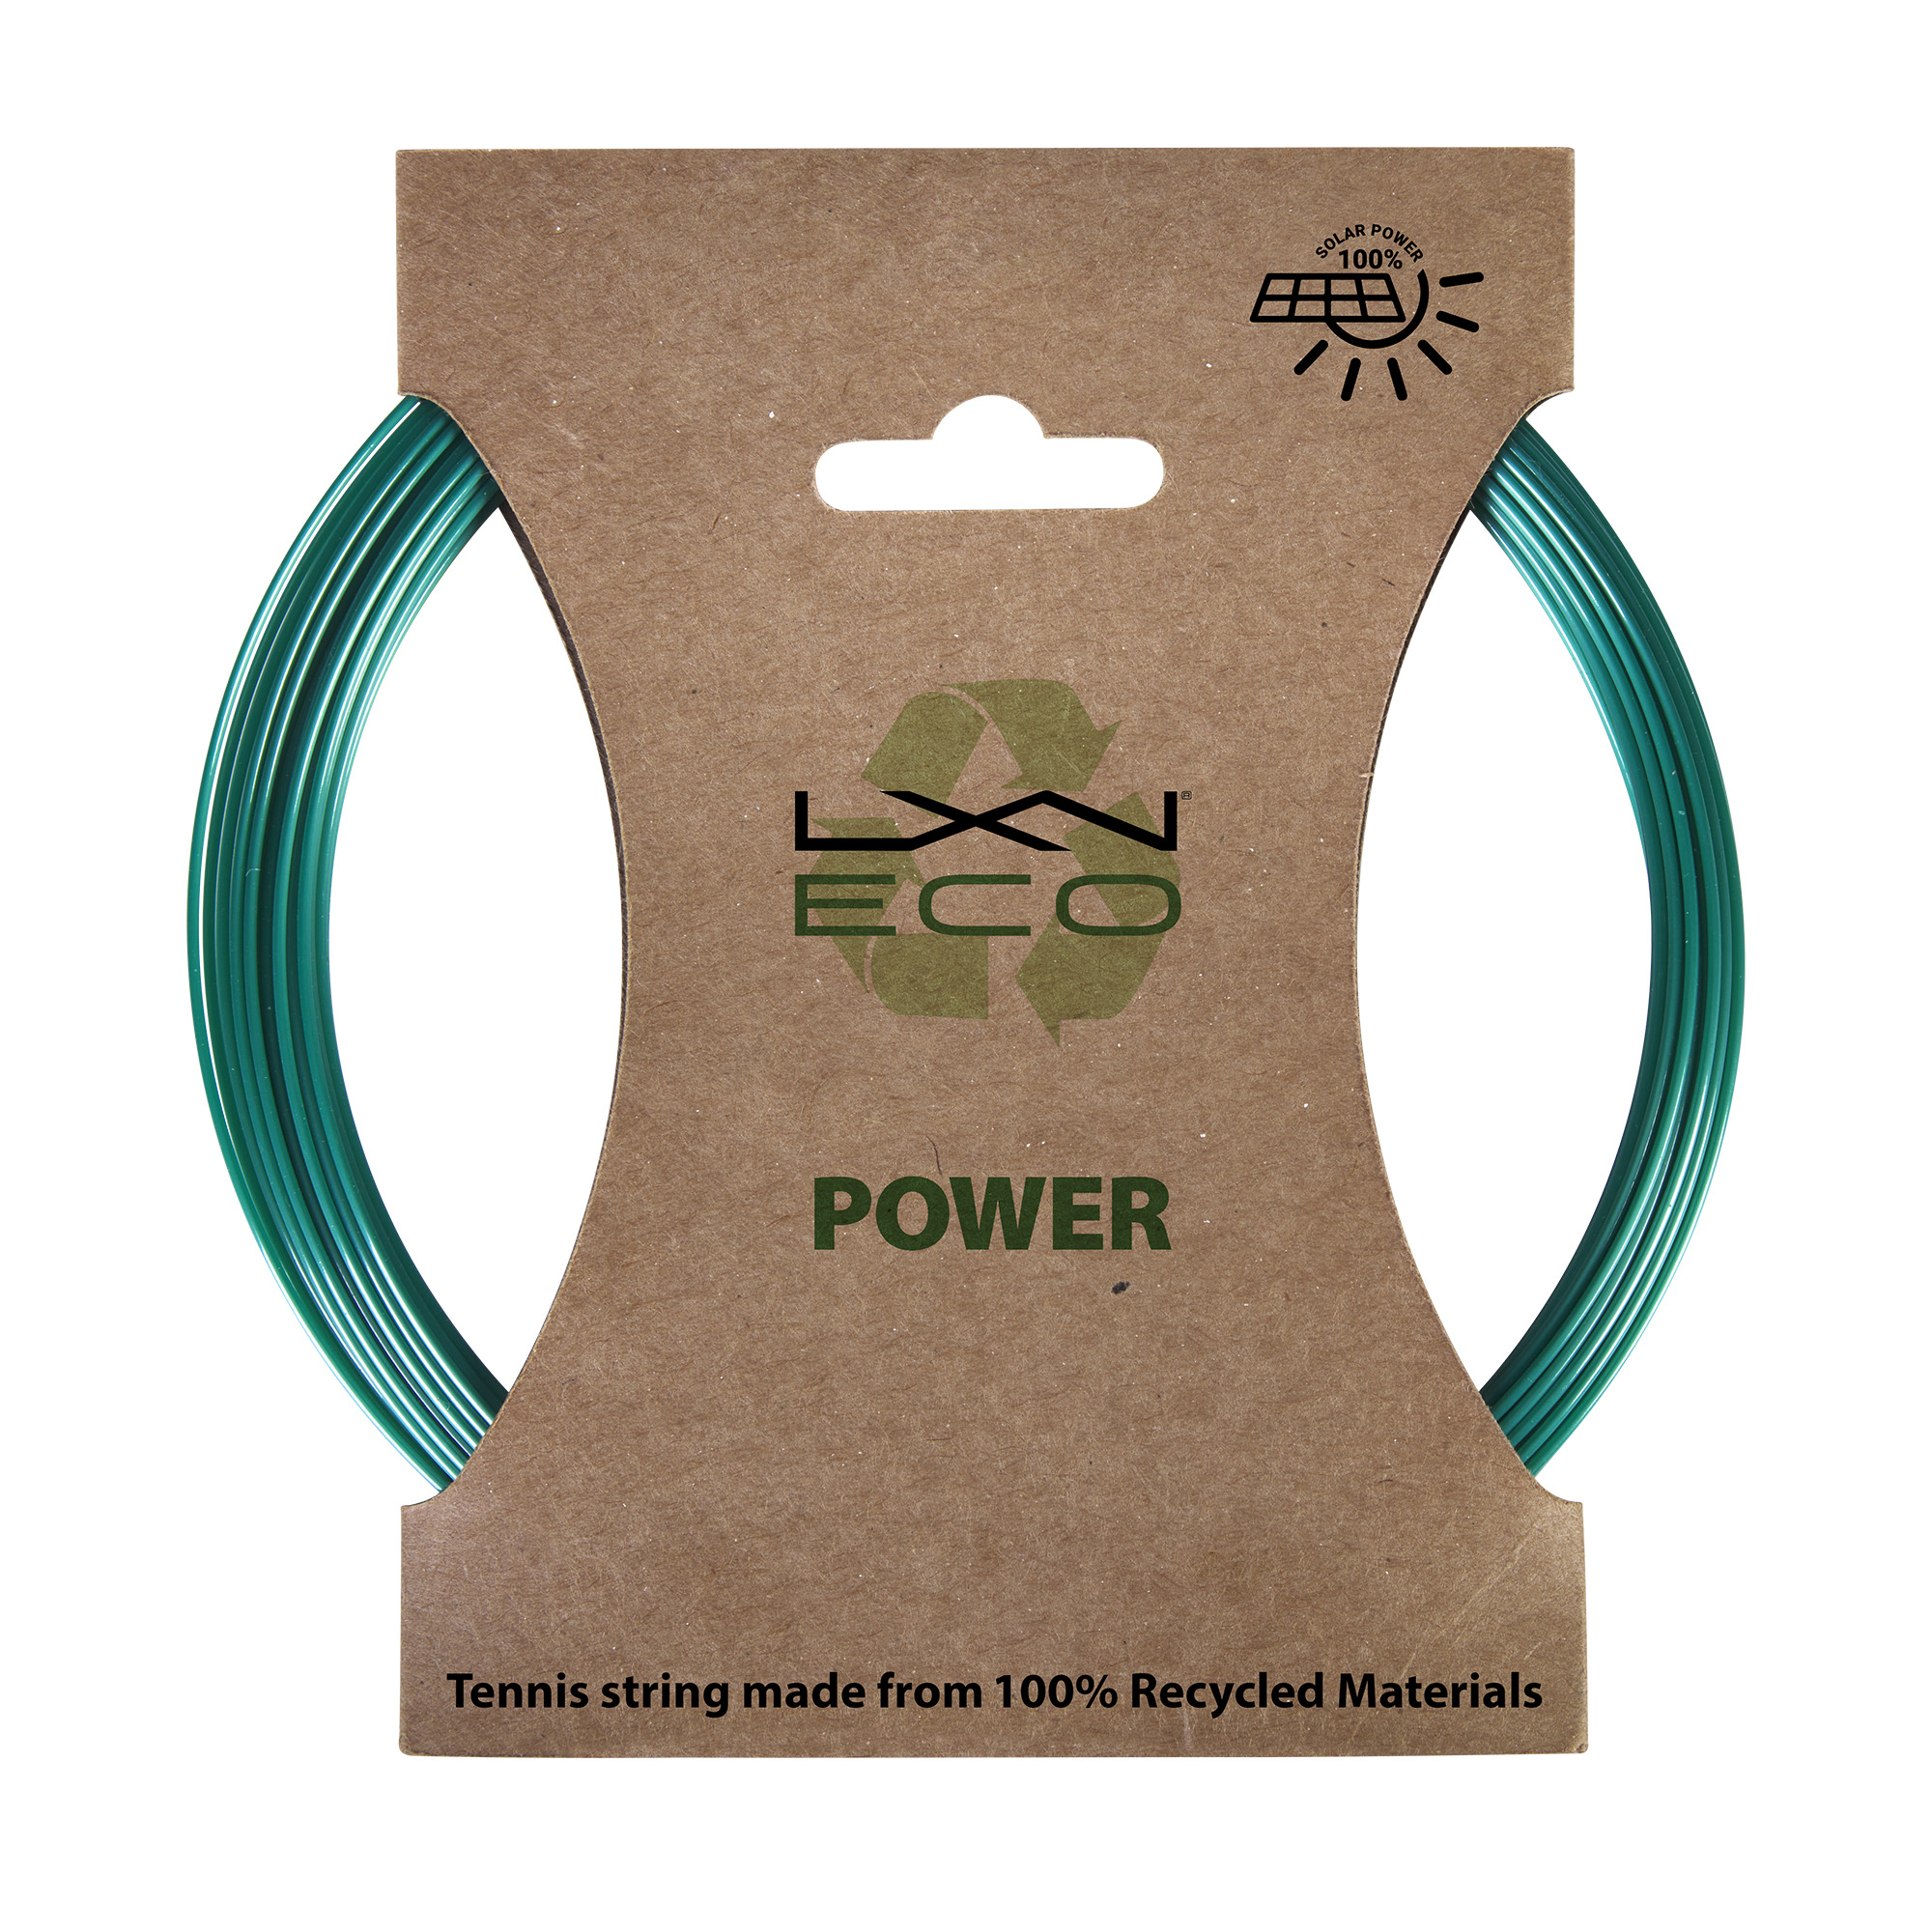 WR8309901_0_LXN_Eco_Power_GR.png.high-res